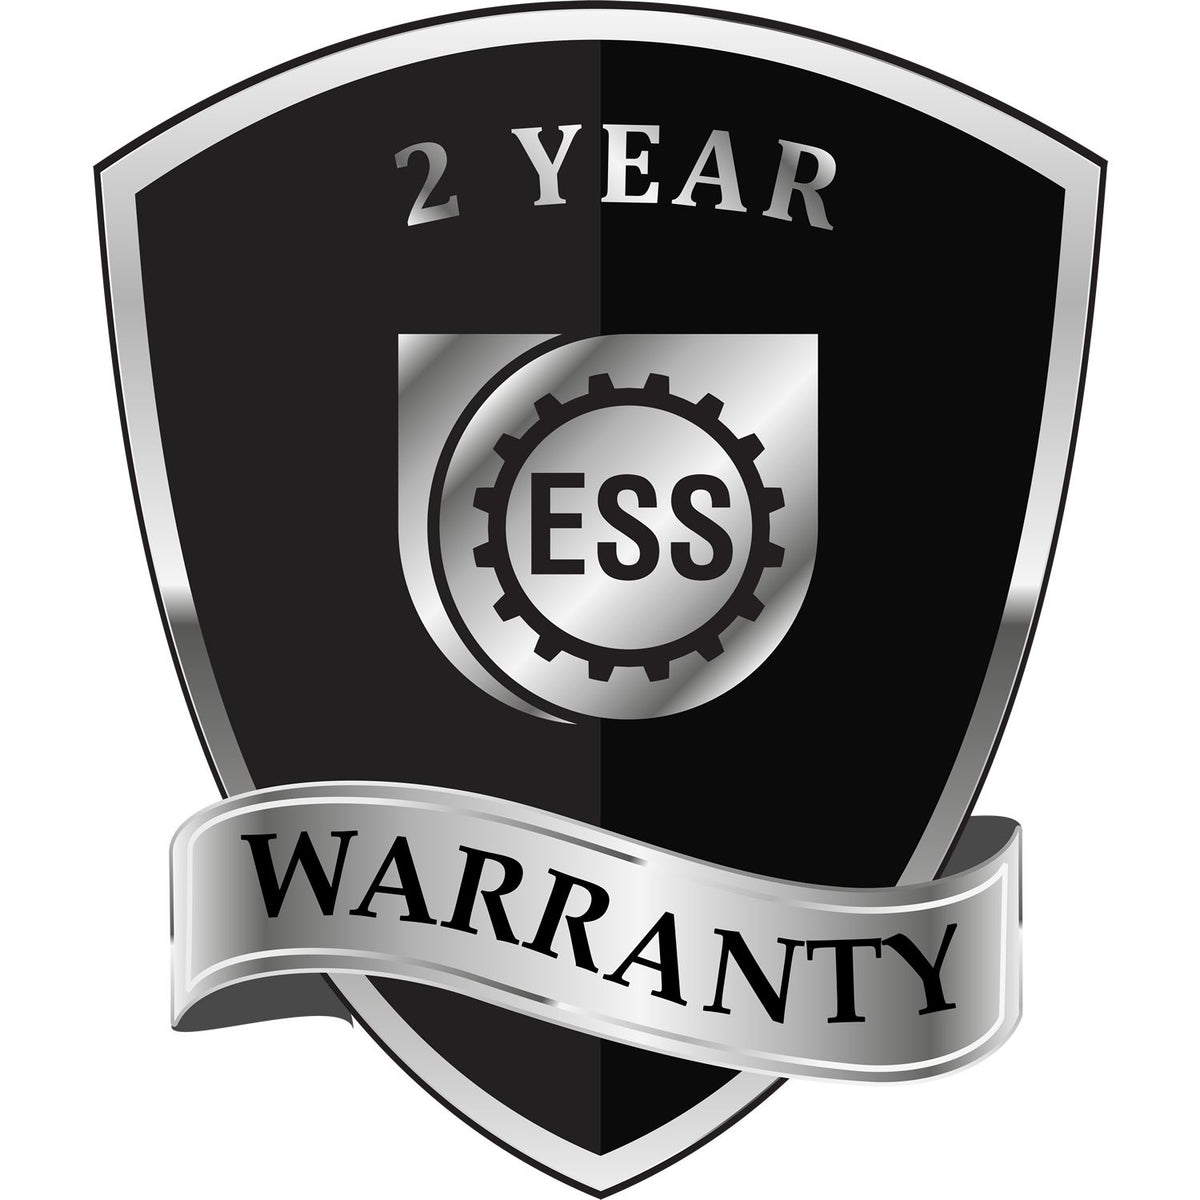 A badge or emblem showing a warranty icon for the Handheld Montana Land Surveyor Seal